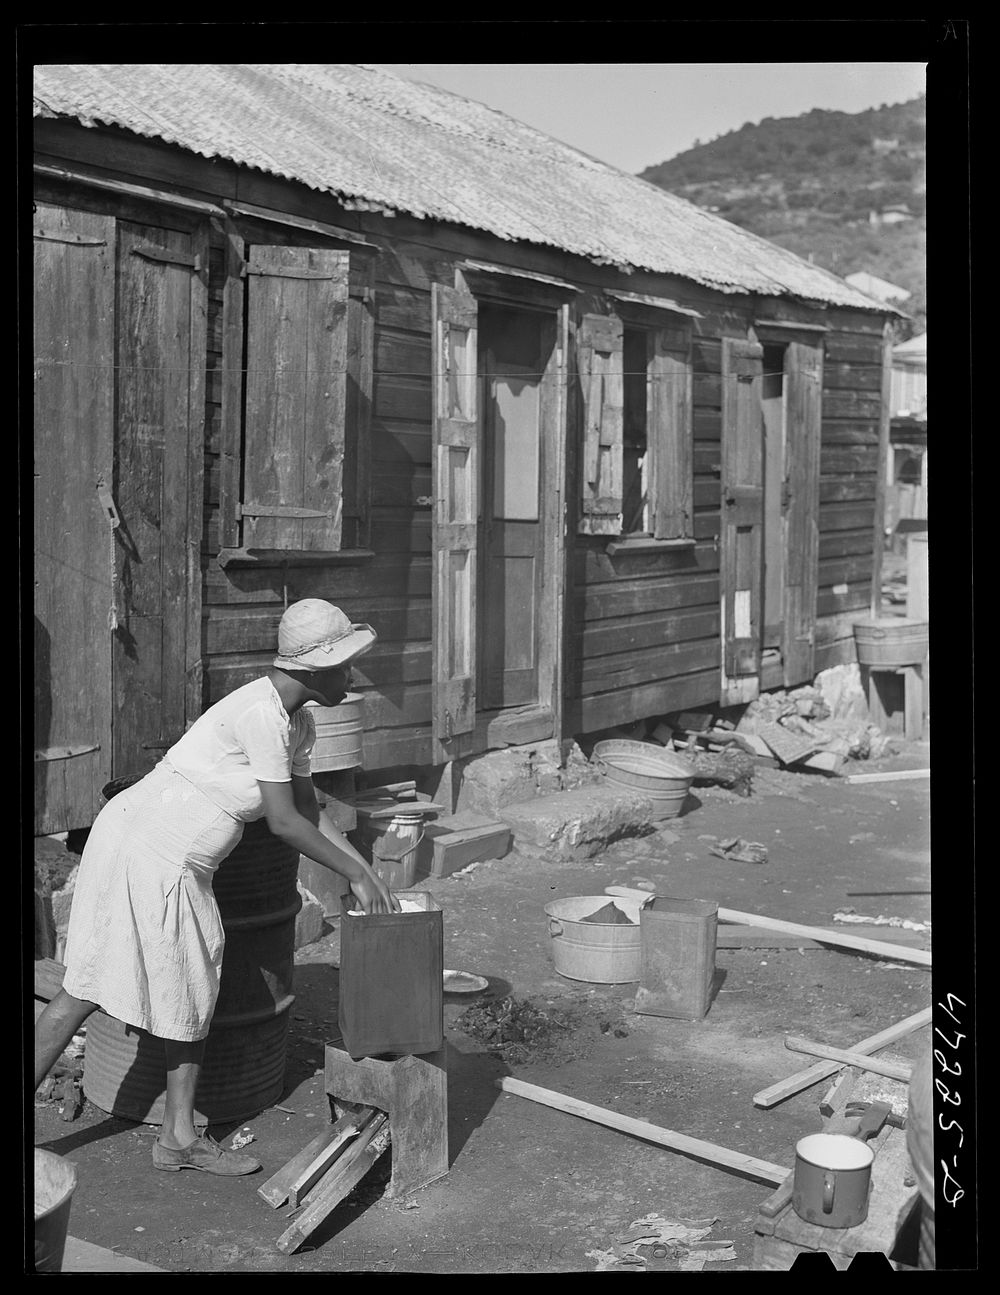 [Untitled photo, possibly related to: Charlotte Amalie, Saint Thomas Island, Virgin Islands. Washing clothes in a slum…